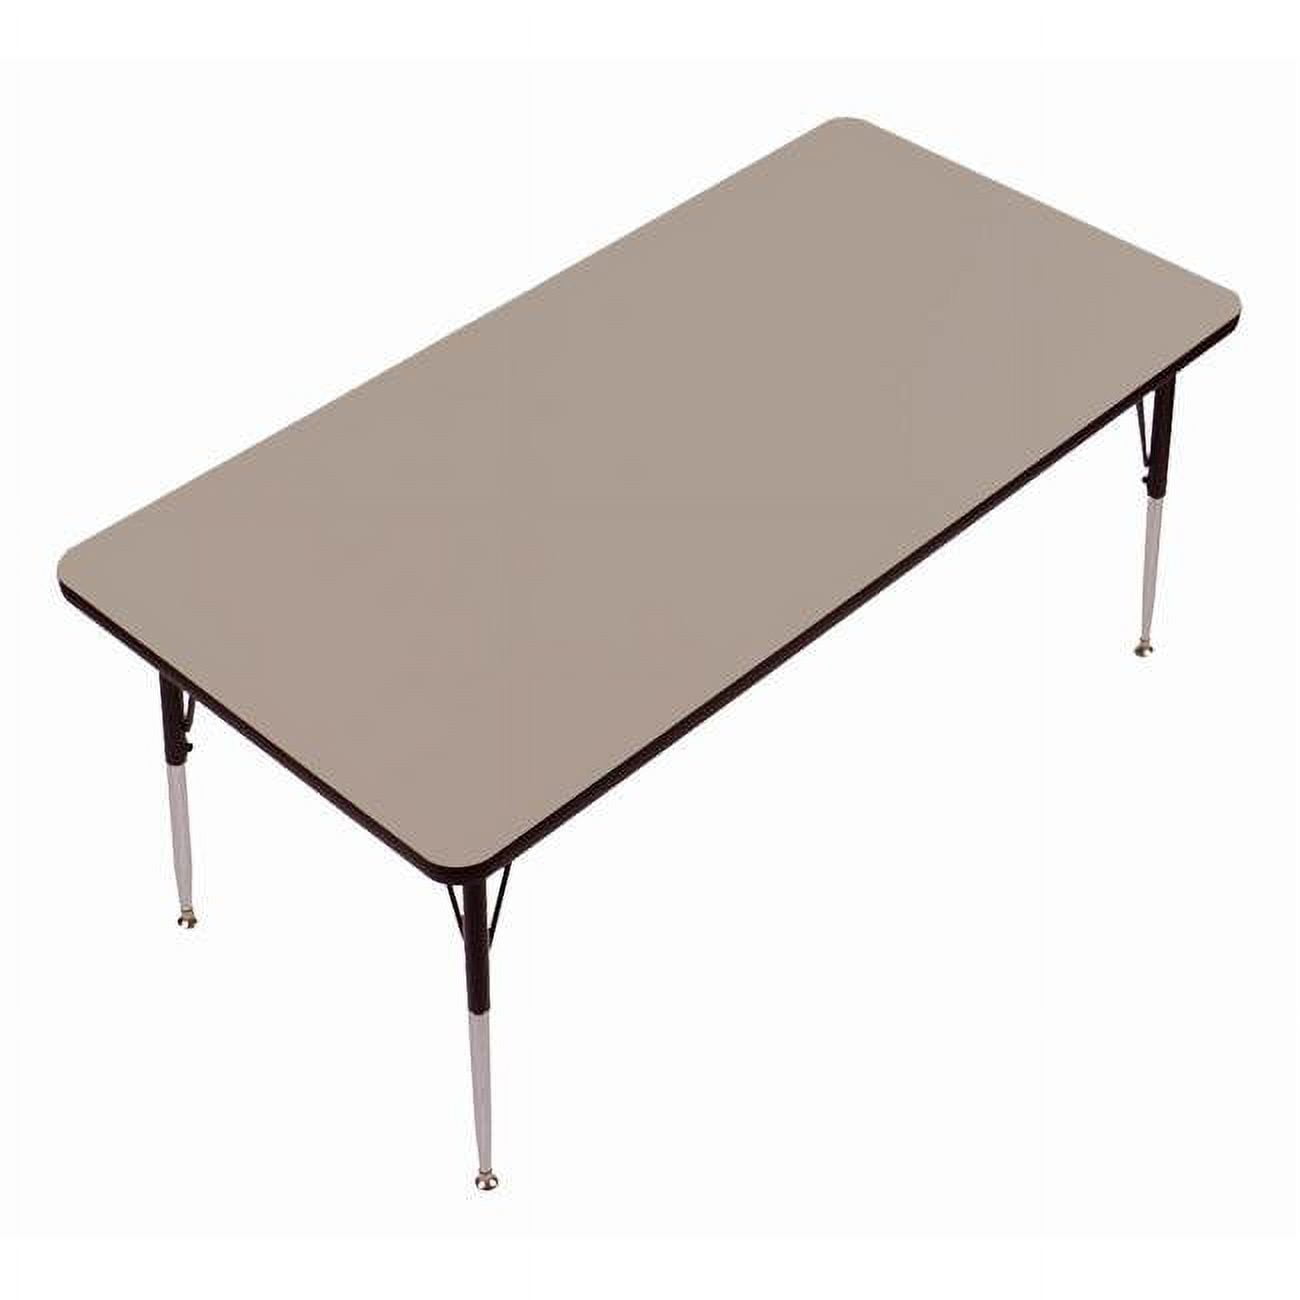 A48-octs-54 1.25 In. High Pressure Top Octagonal Activity Tables, Savannah Sand - 48 In.